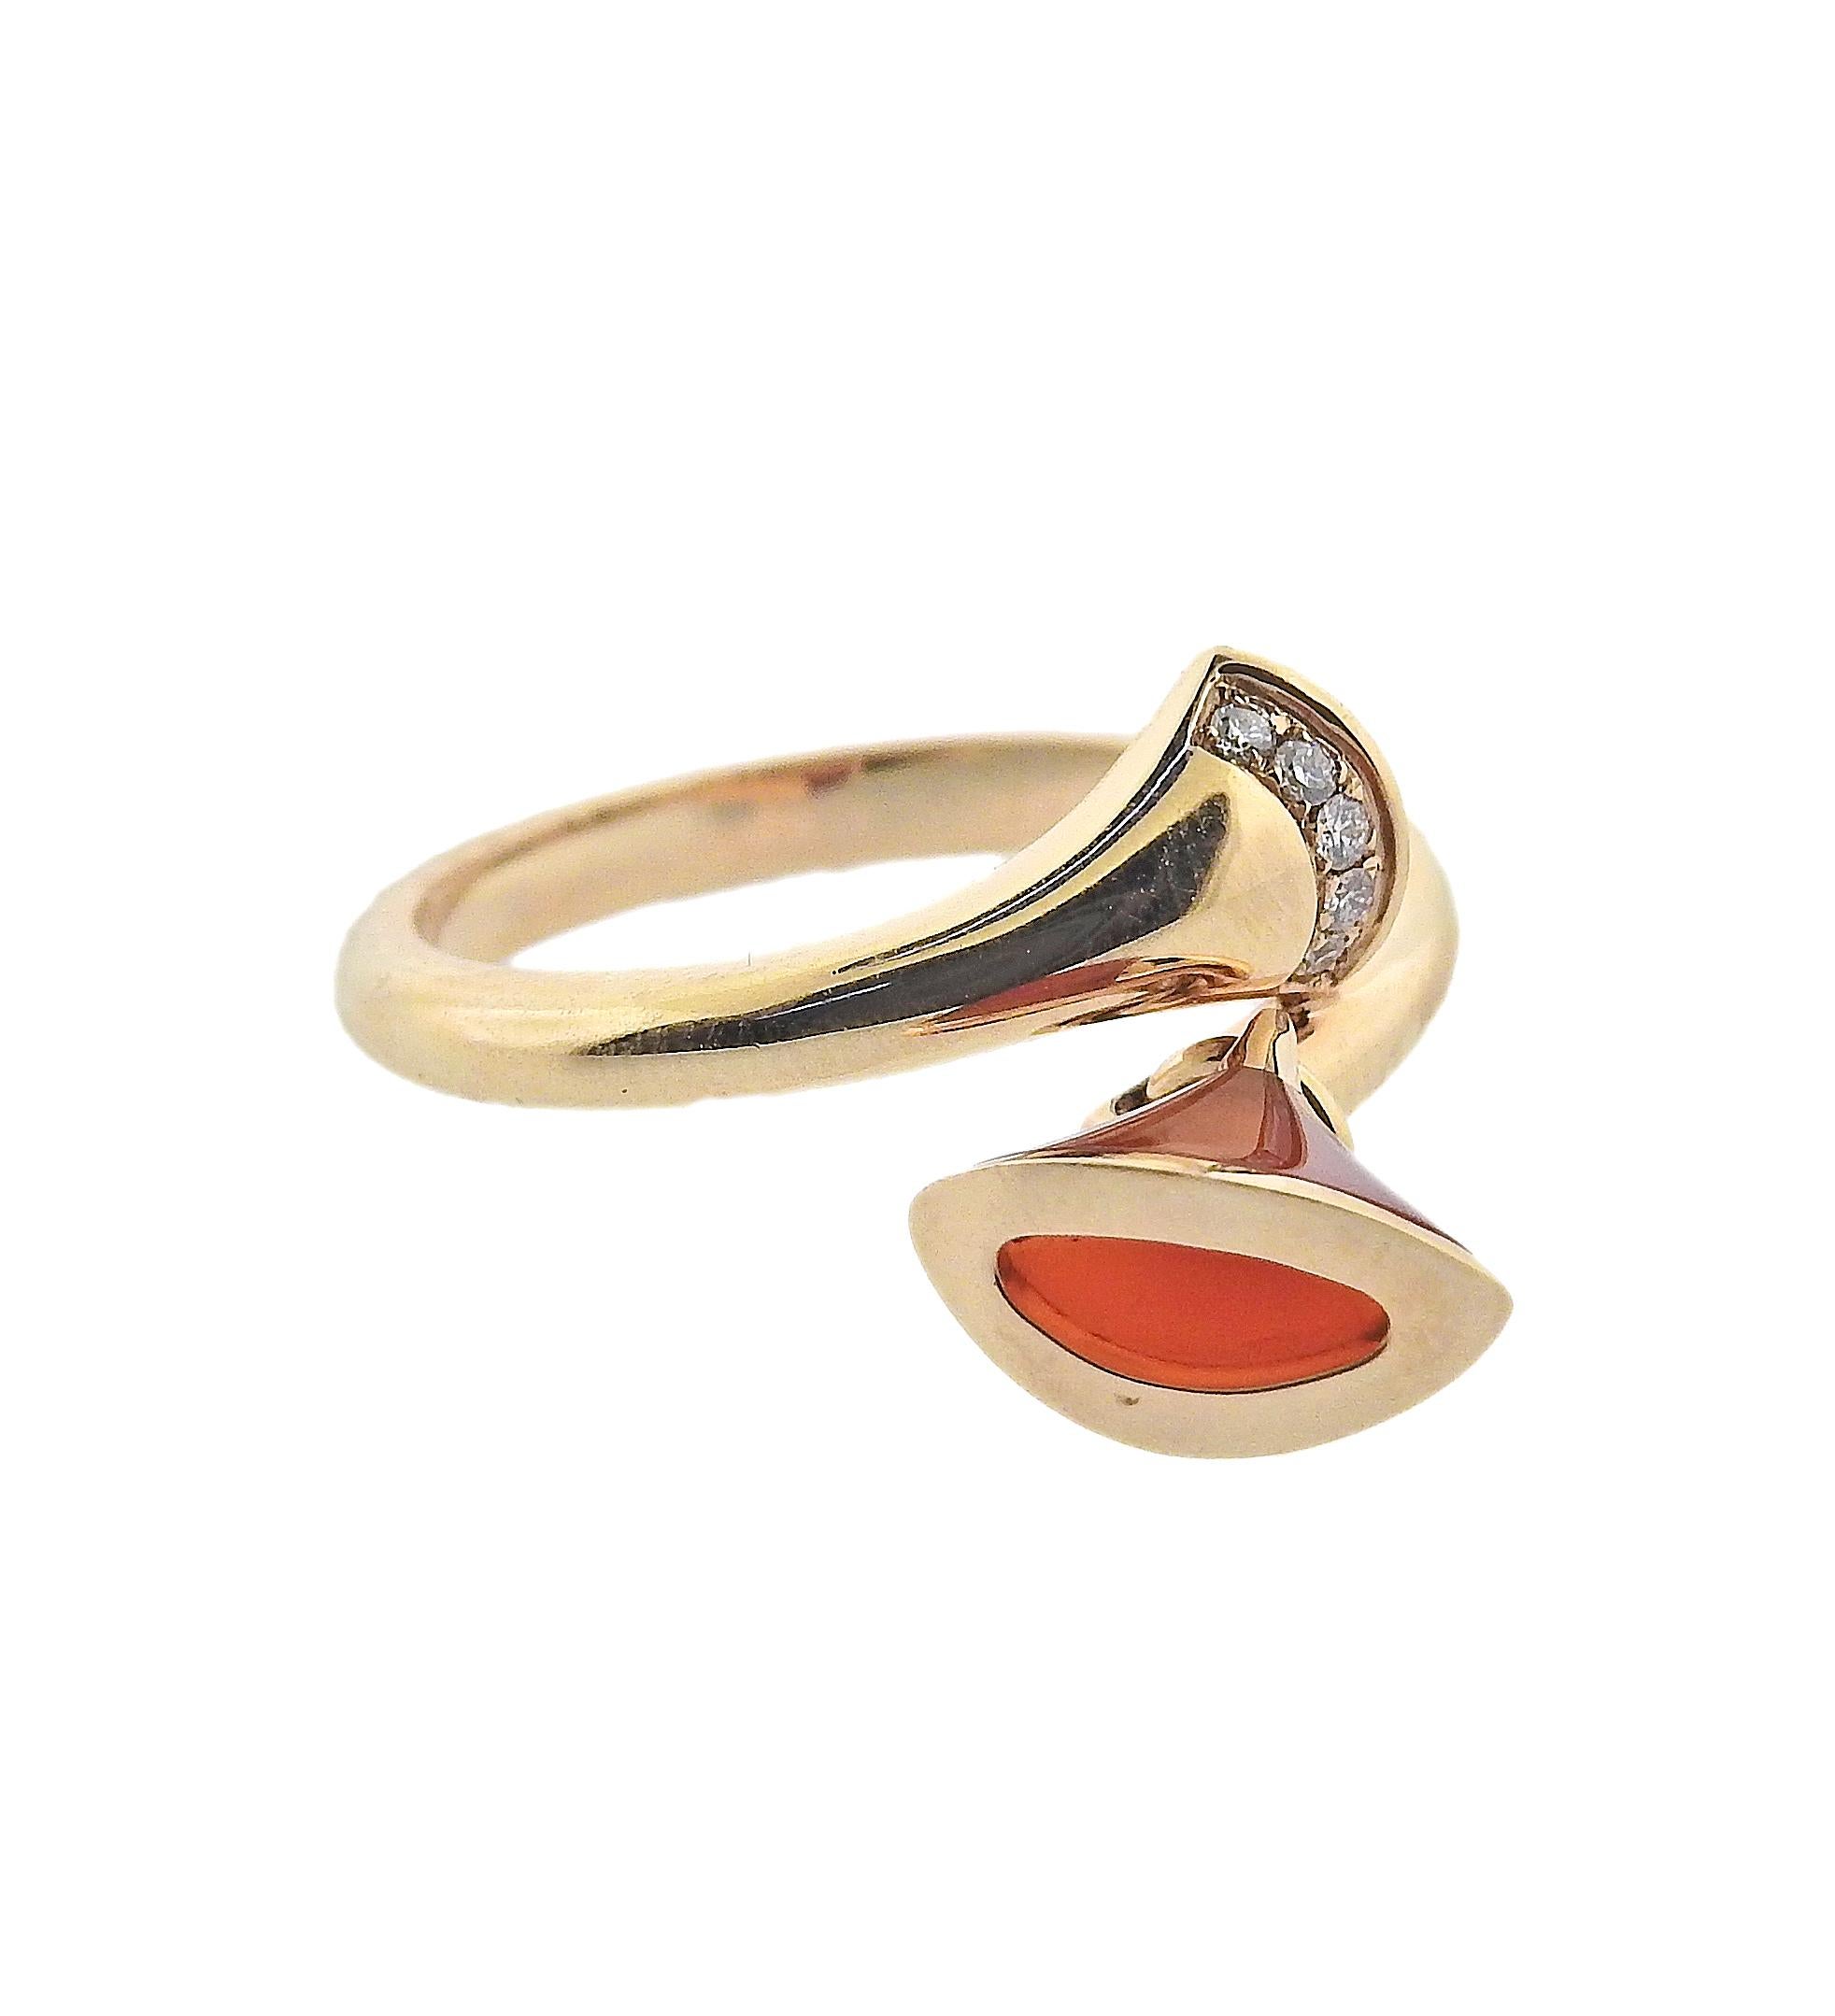 18k rose gold Diva's Dream charm ring by Bvlgari, with carnelian and 0.04ctw G/VS diamonds. Ring size 6, top of the ring with charm measures 20mm. Marked: Bvlgari, Italian Mark, 750, Serial Number. Weight is 4.7 grams.  Comes with COA and box.